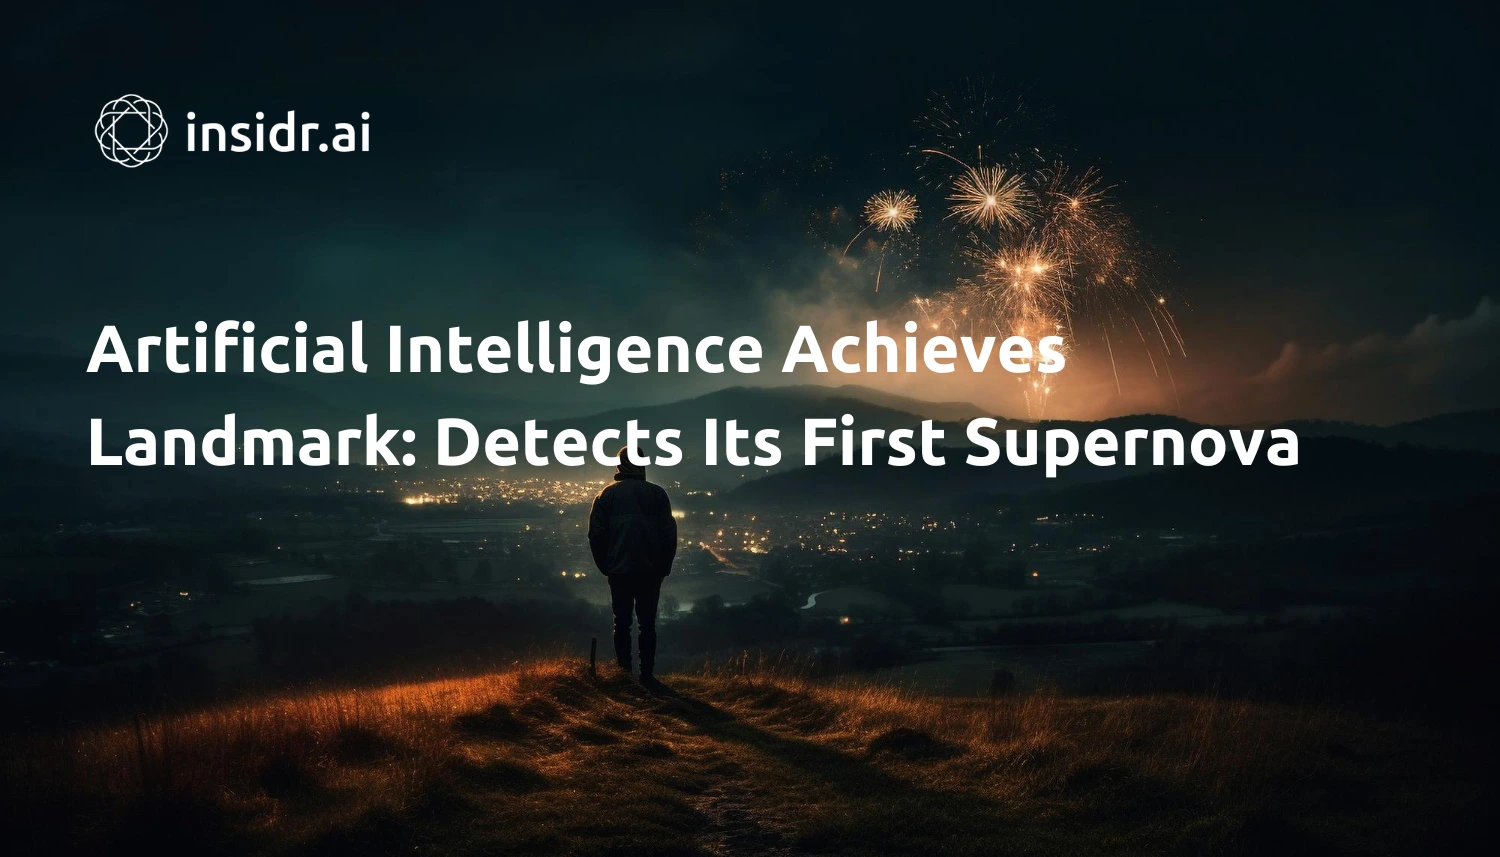 Artificial Intelligence Detects Its First Supernova